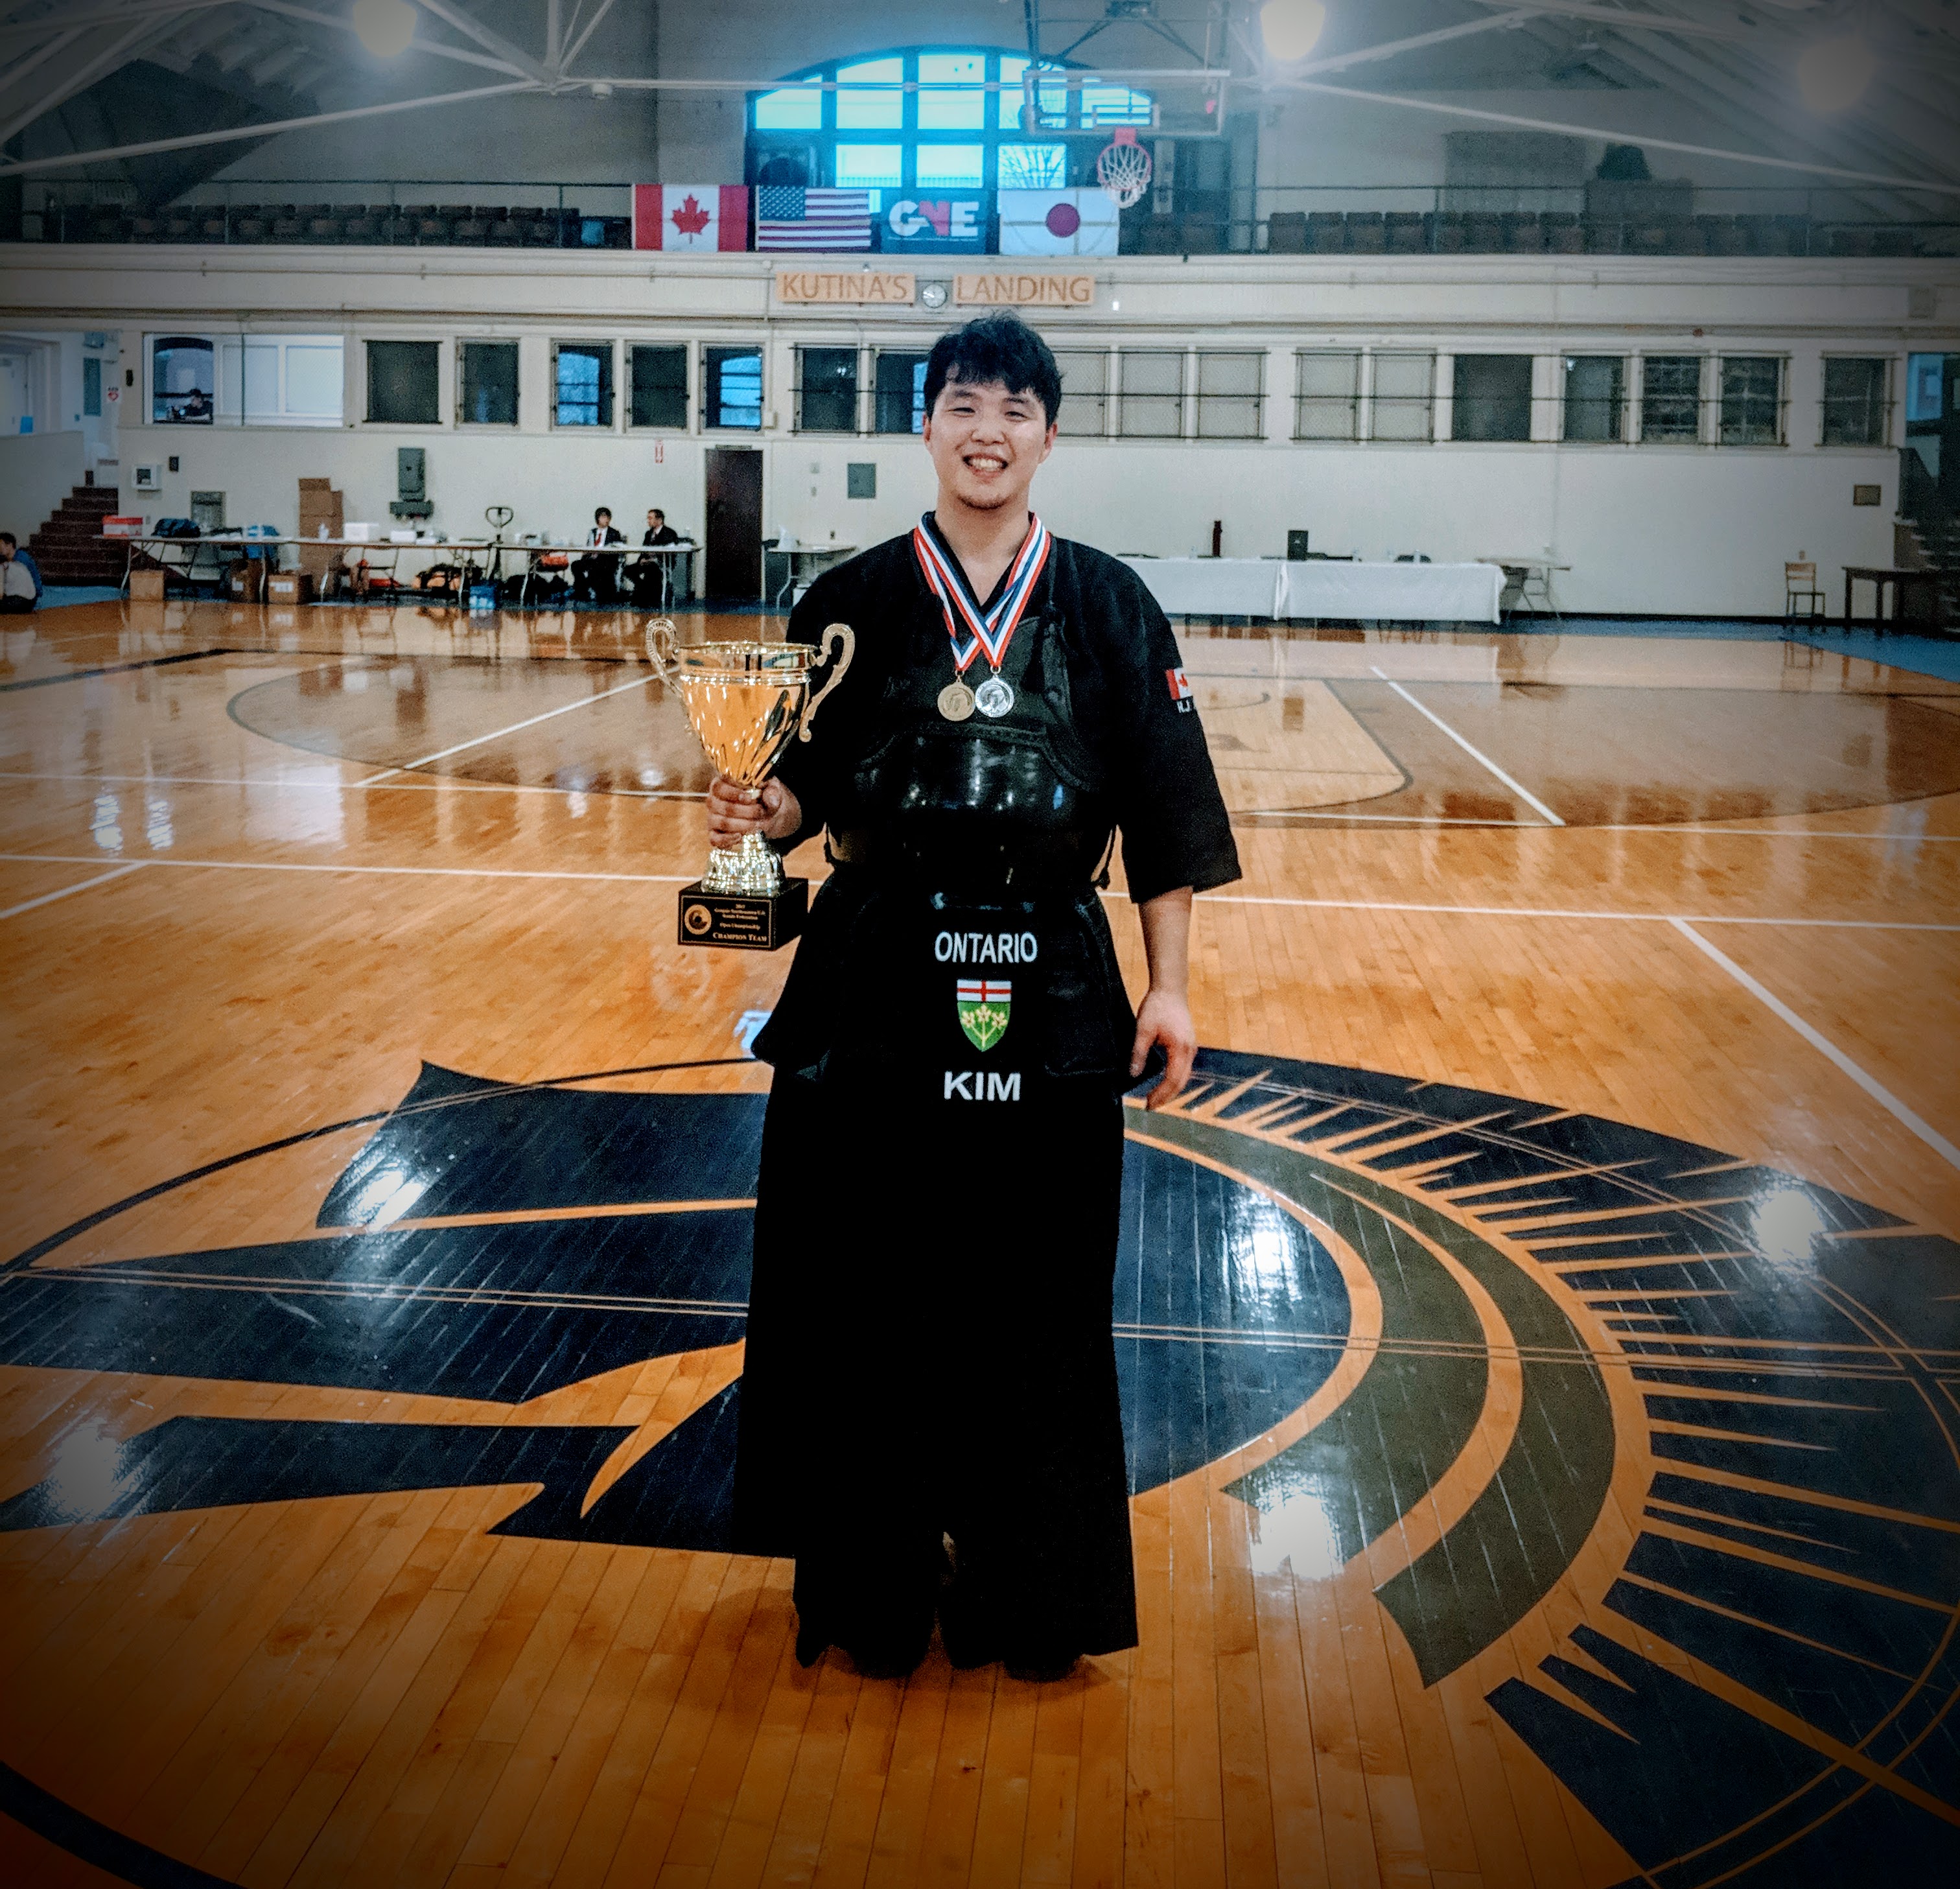 Instructor, Bill Kim, standing in a gymnasium wearing a kendo uniform and bogu (armour) and holding a trophy